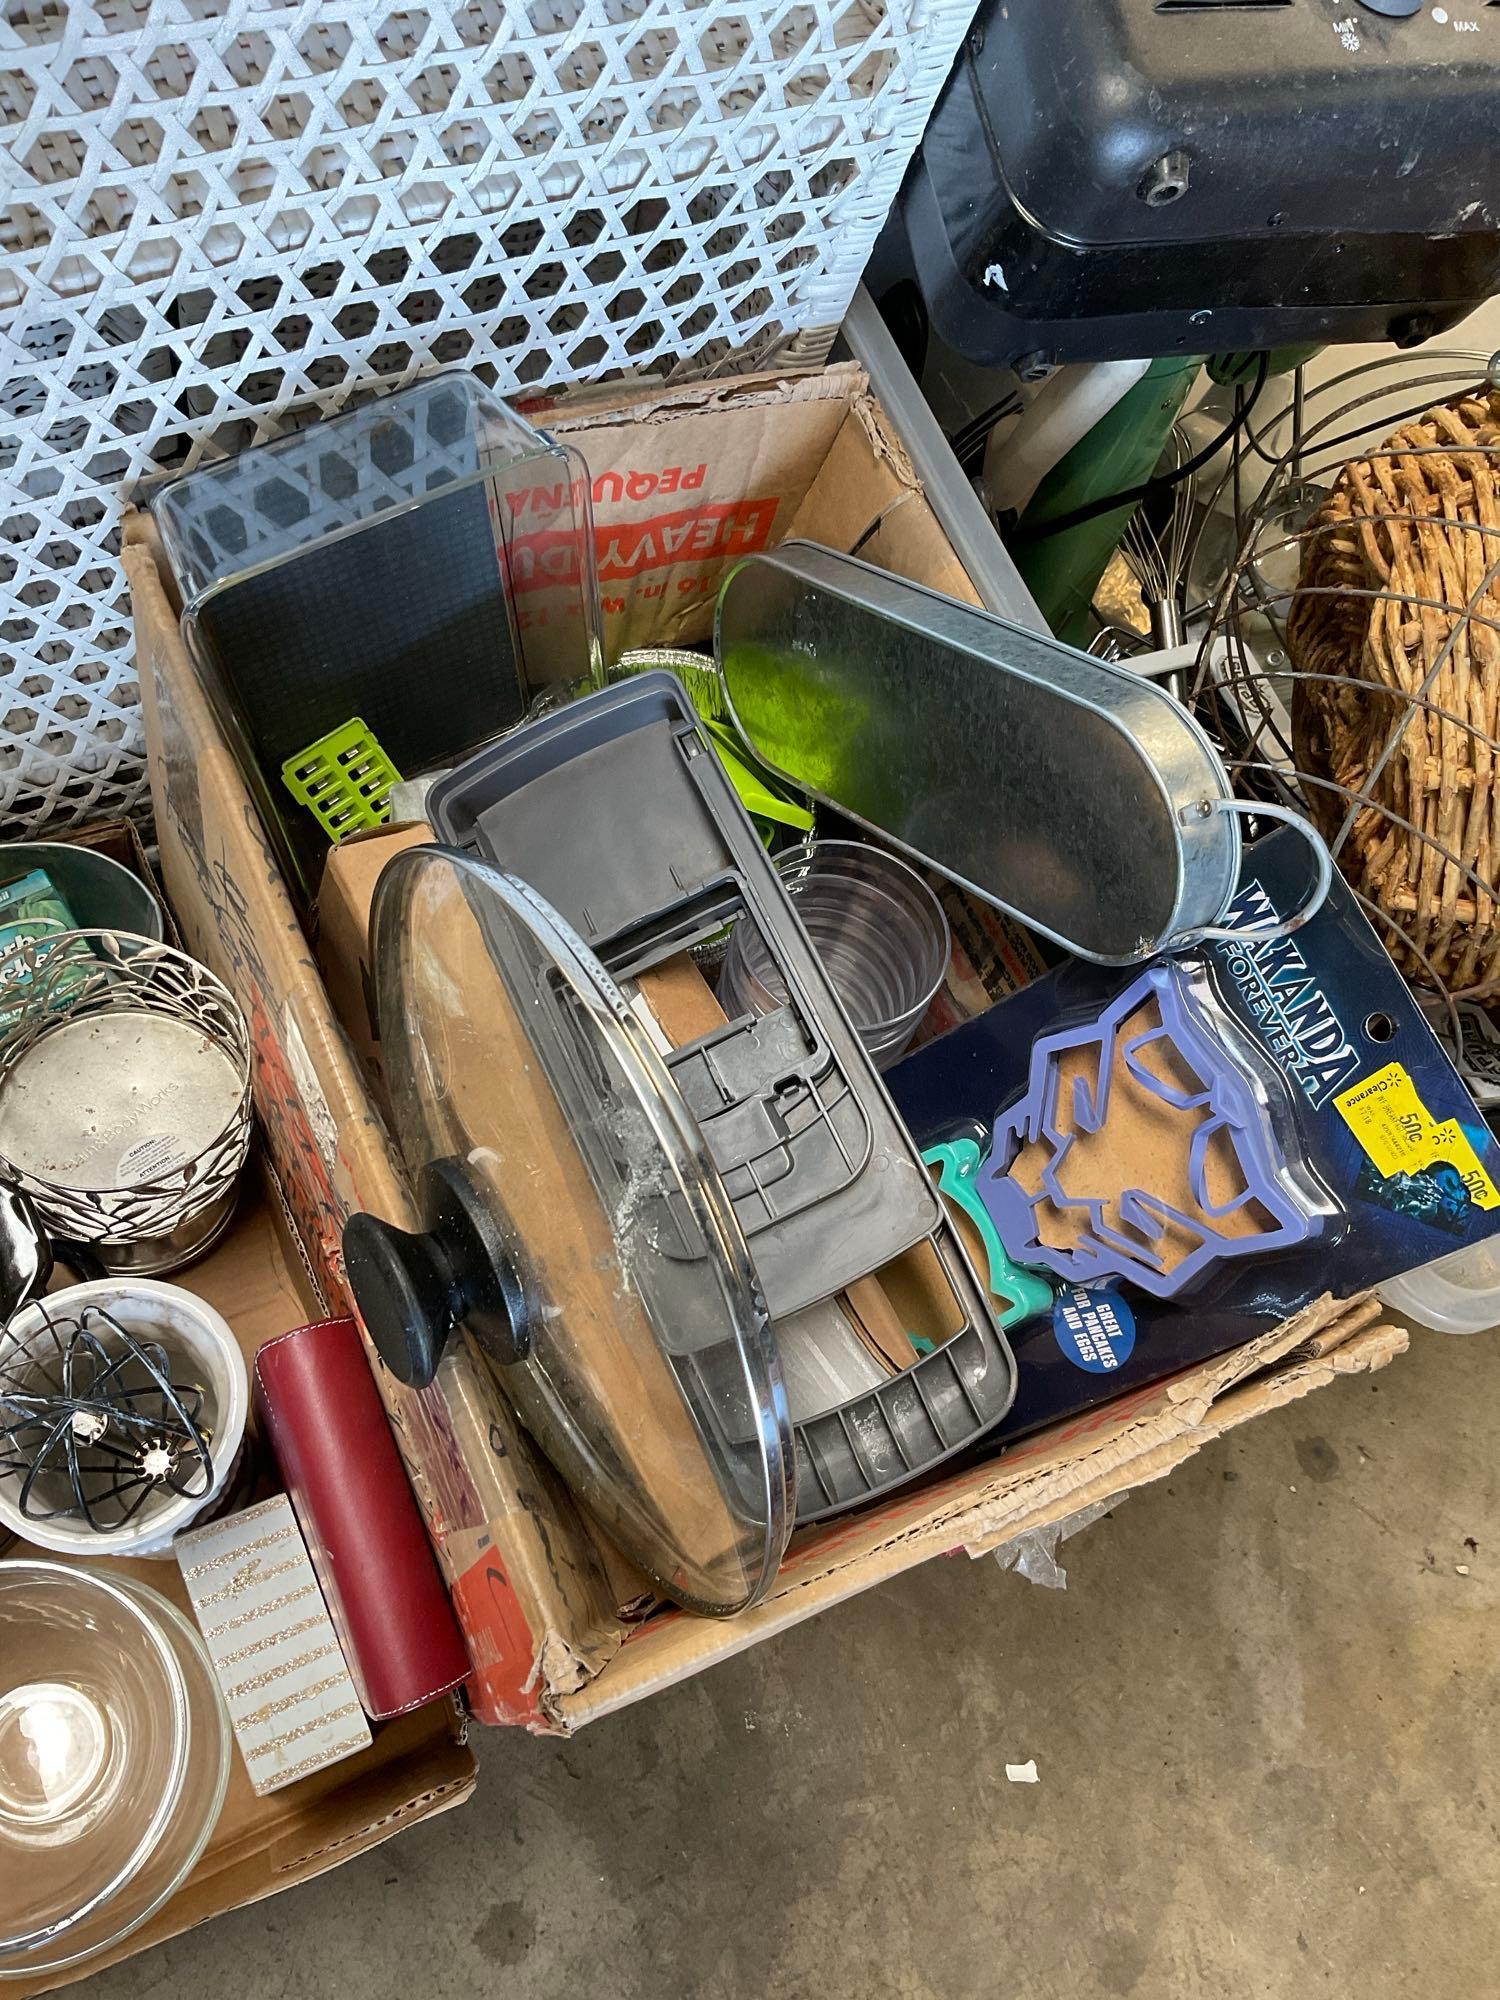 Large lot of kitchen items, appliances, buttons, heater, etc